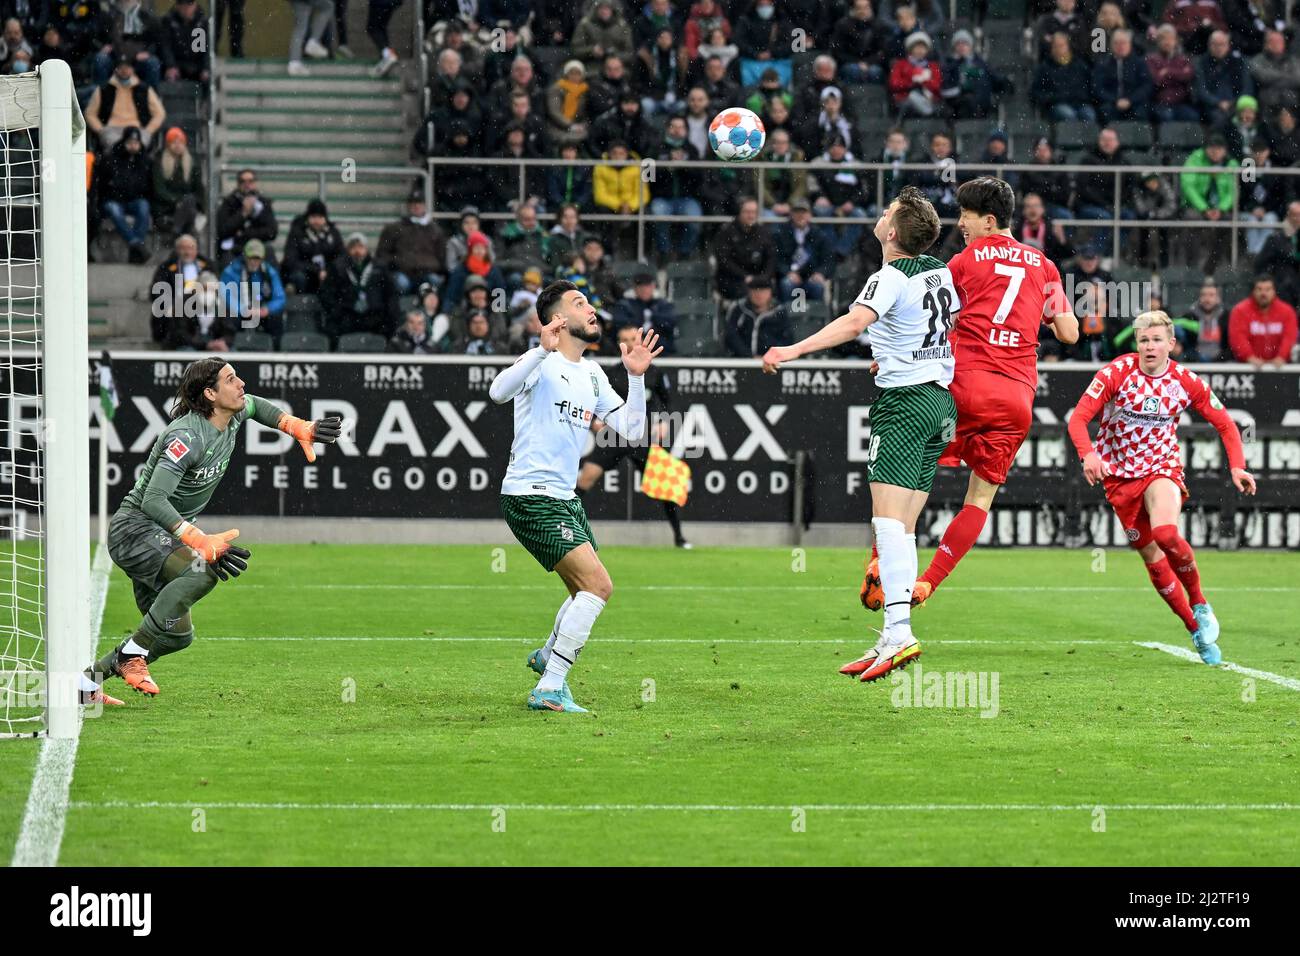 Moenchengladbach, Germany. 3rd Apr, 2022. Lee Jae Sung (2nd R) of Mainz 05 heads for a goal during the German first division Bundesliga football match between Borussia Moenchengladbach and FSV Mainz 05 in Moenchengladbach, Germany, April 3, 2022. Credit: Ulrich Hufnagel/Xinhua/Alamy Live News Stock Photo